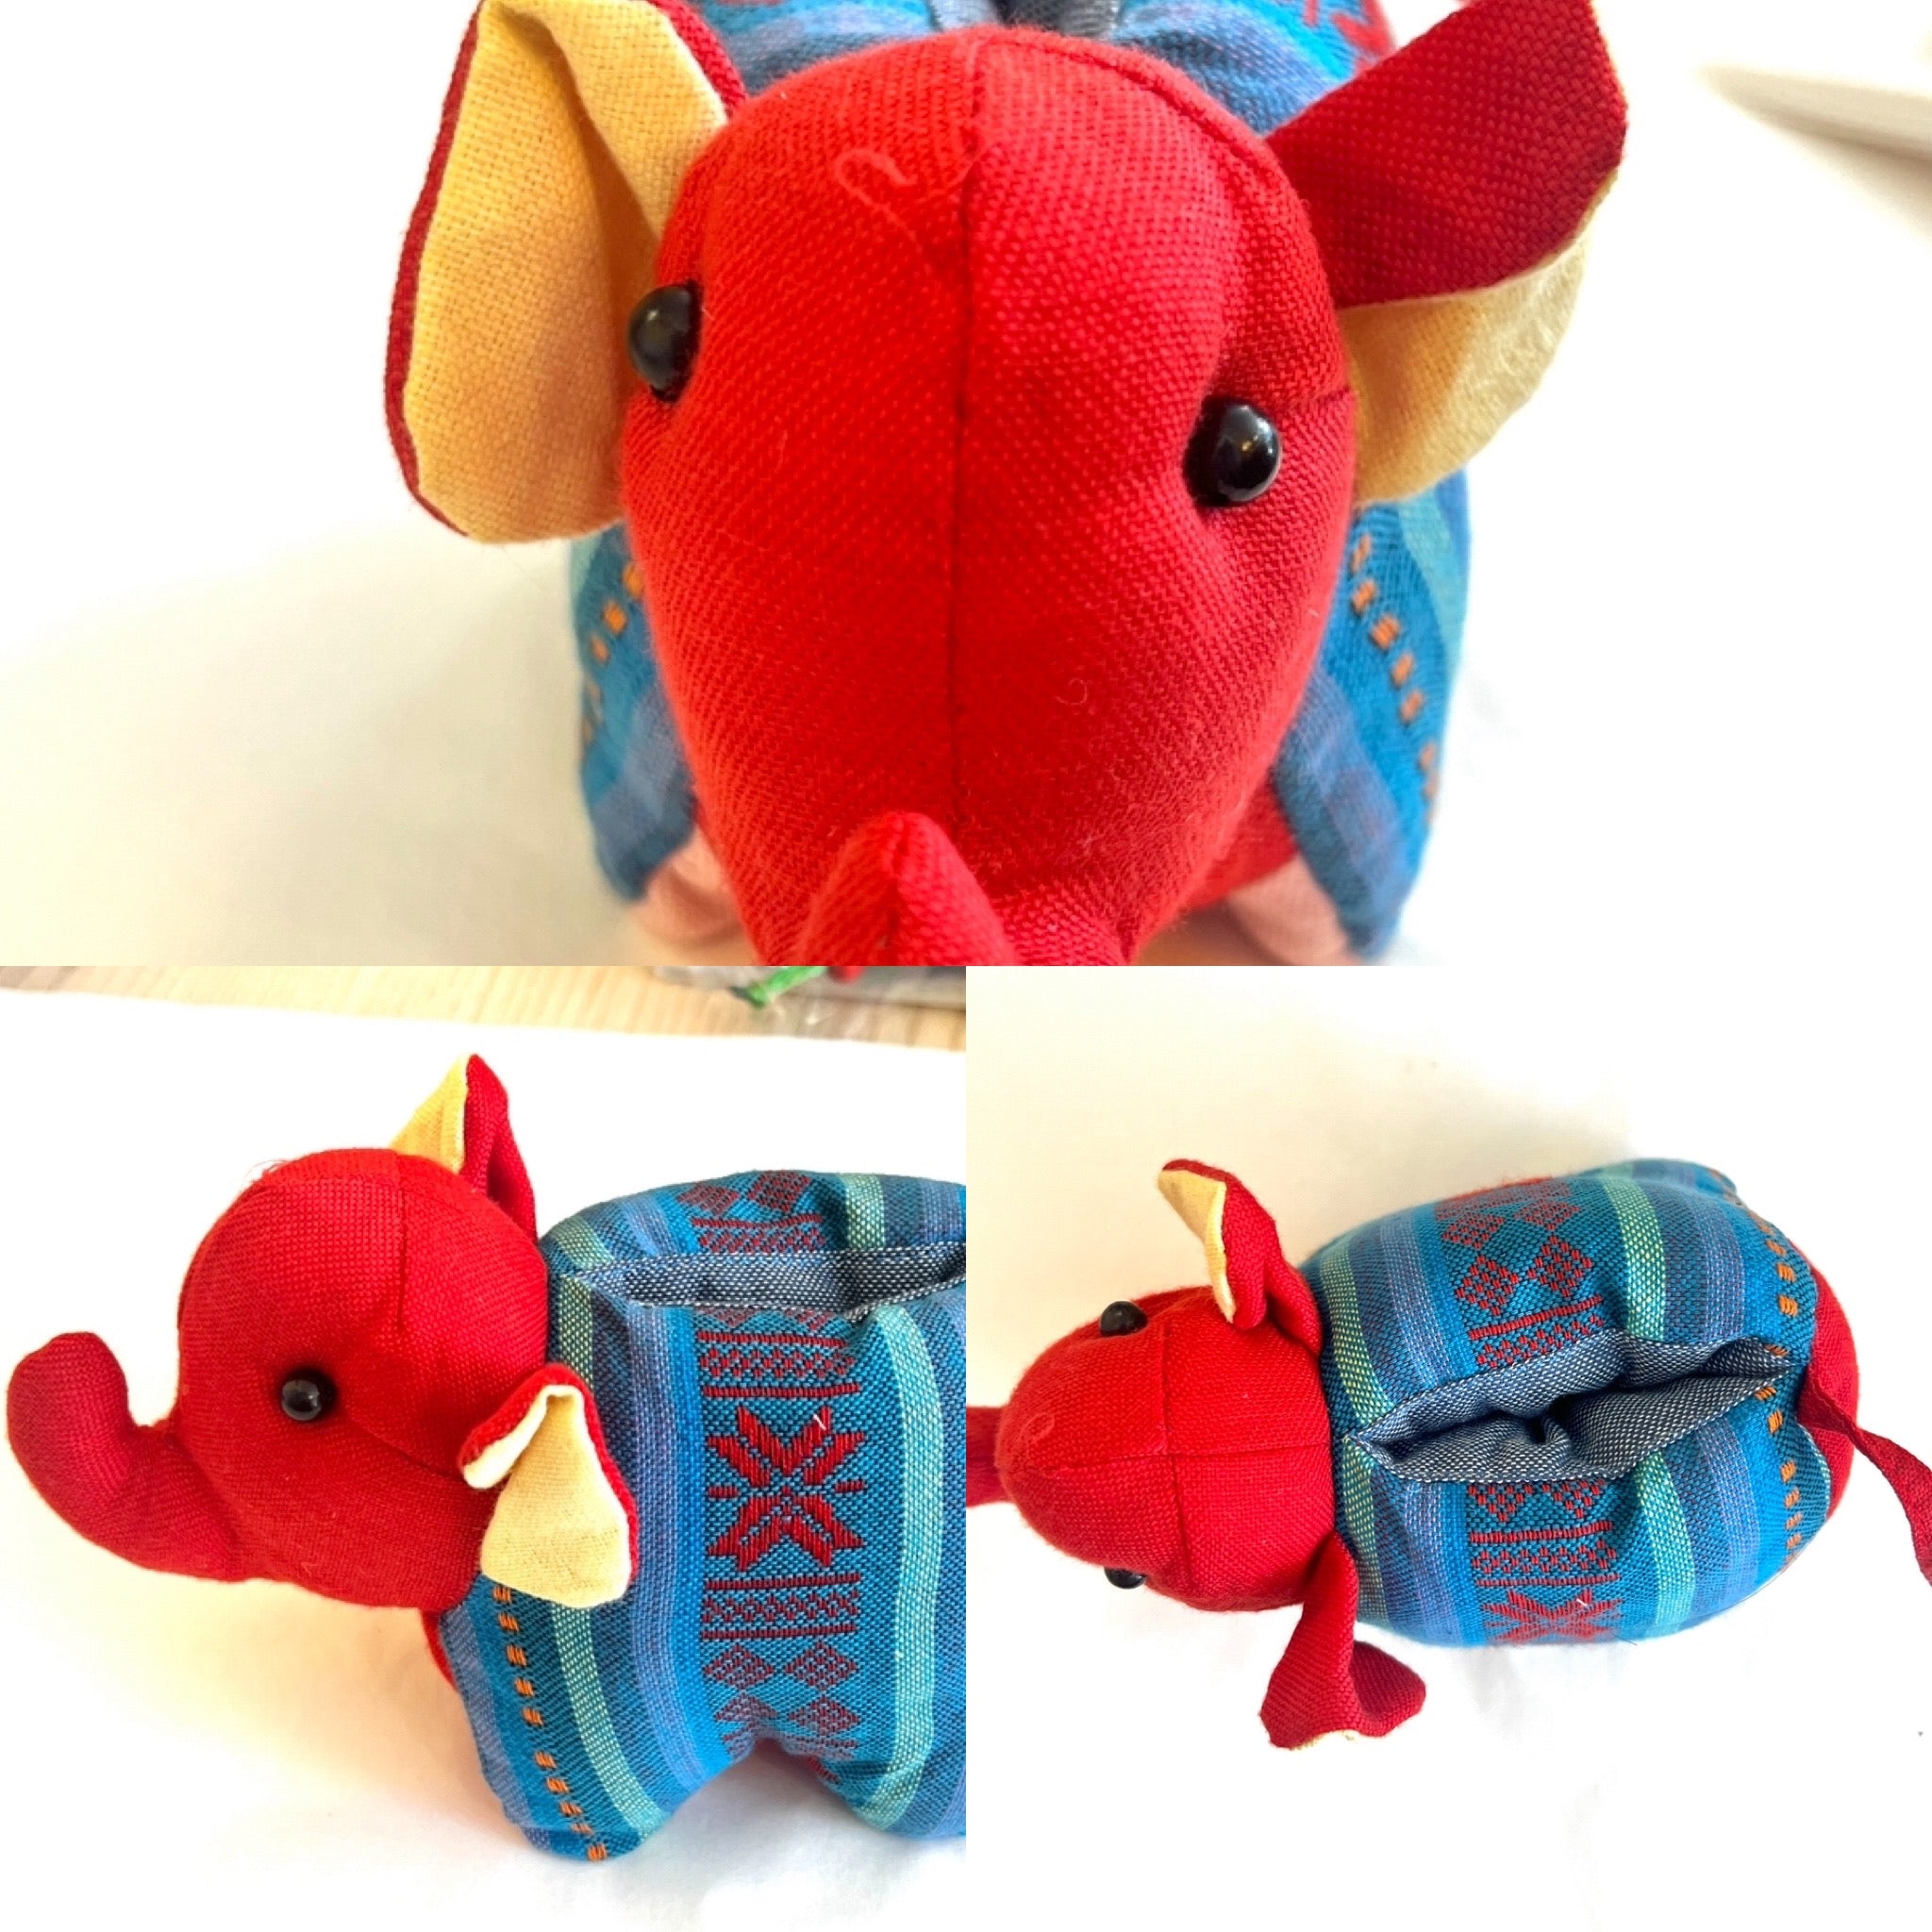 "Tooth Fairy" Stuffed Animals with pocket